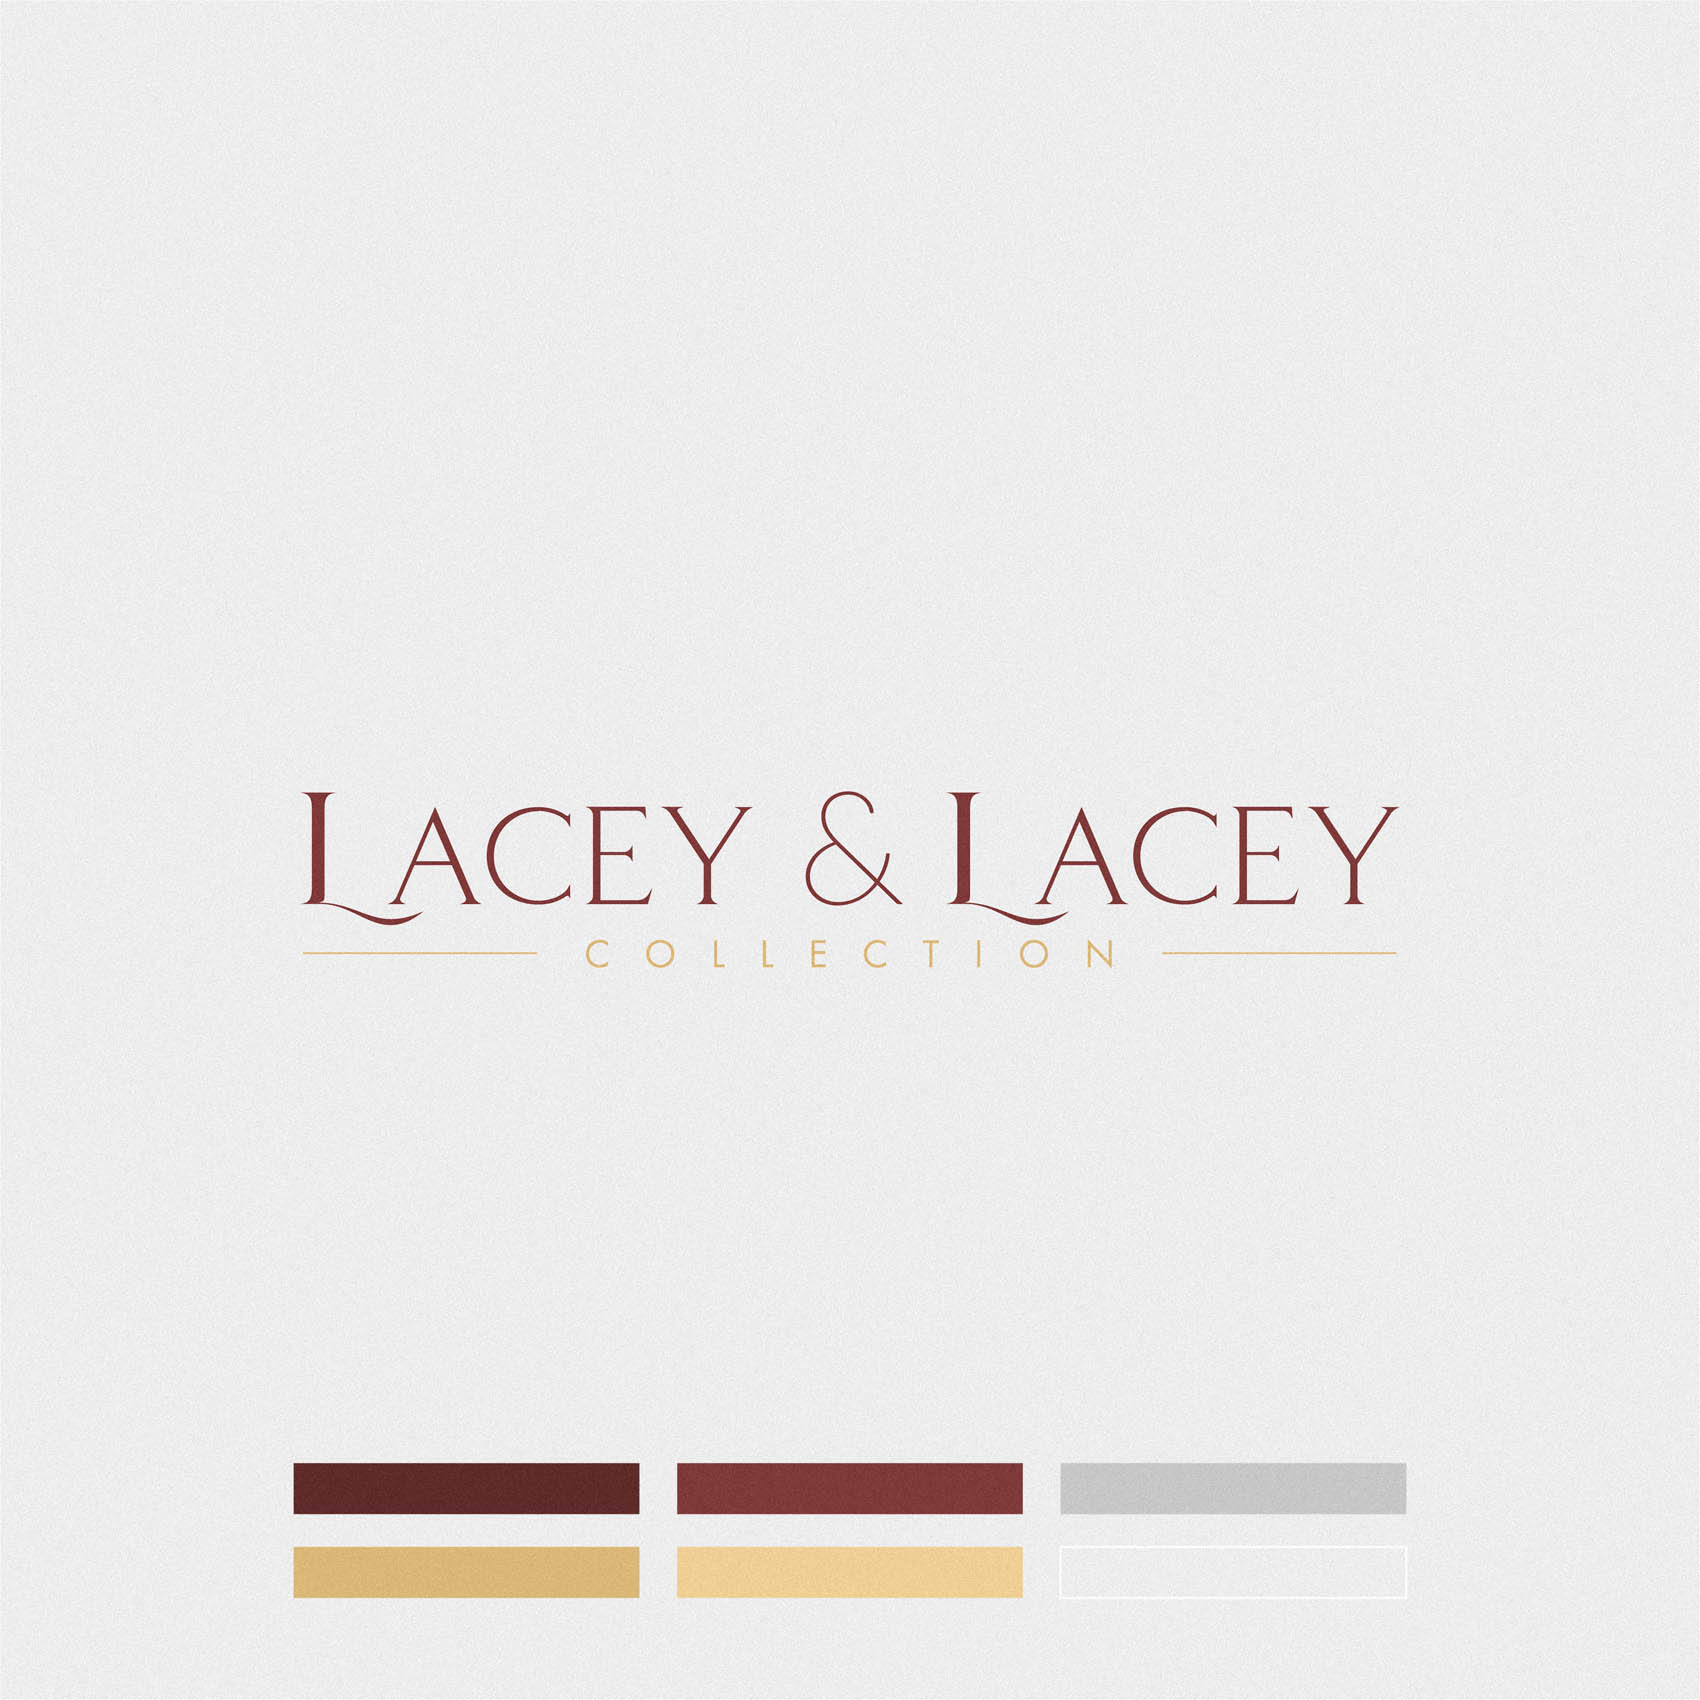 Lacey & Lacey - Luxury Candle Packaging Logo & Brand Identity16